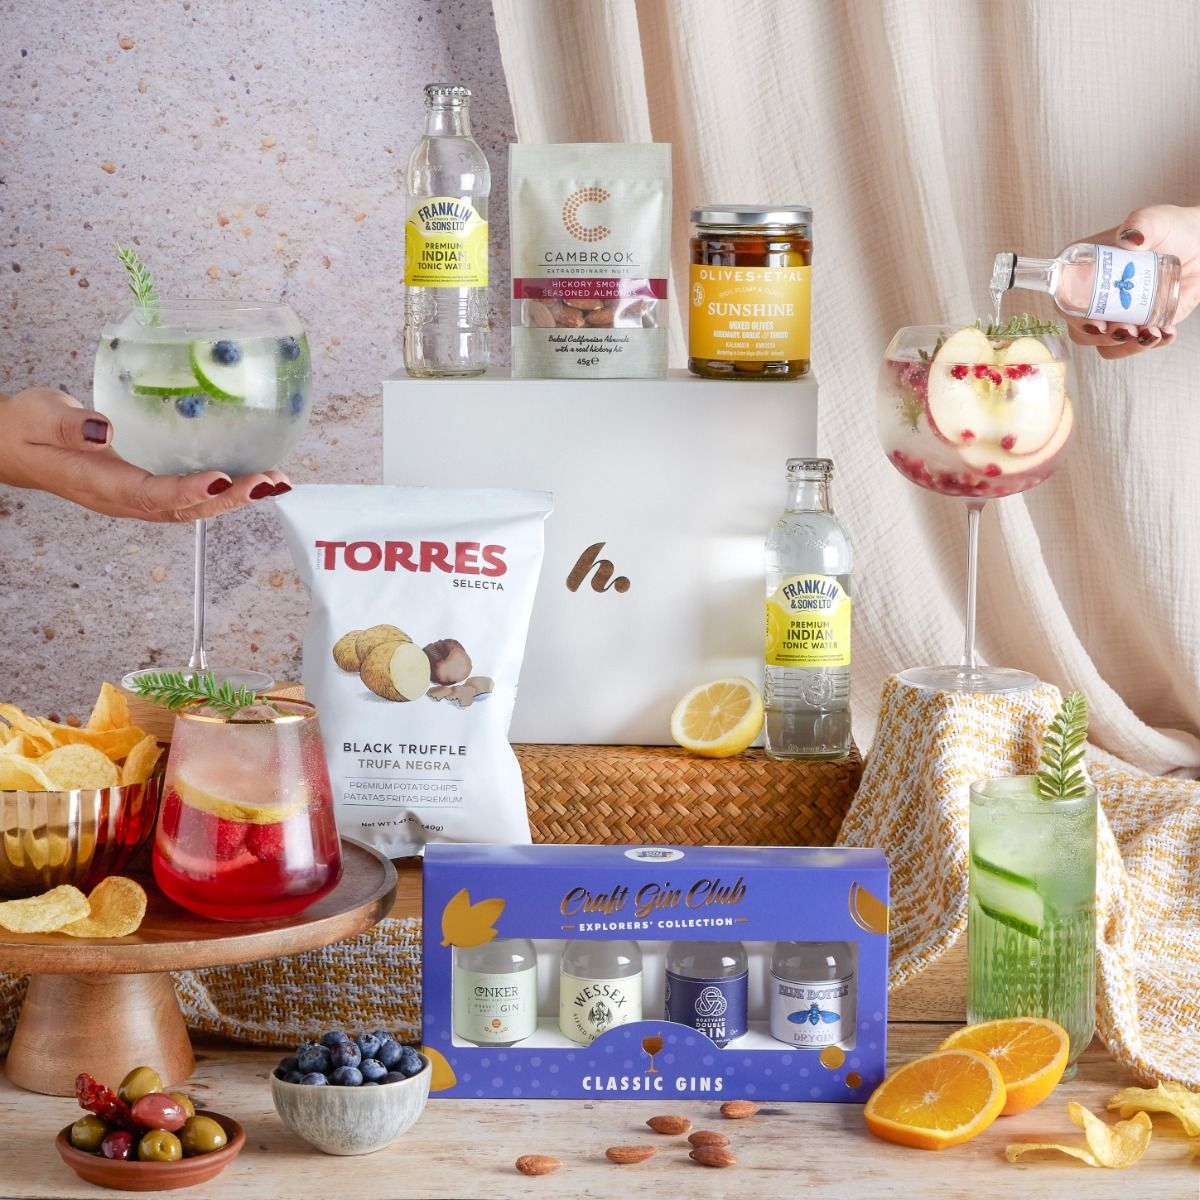 The Craft Gin Club Tasting Hamper with contents on display